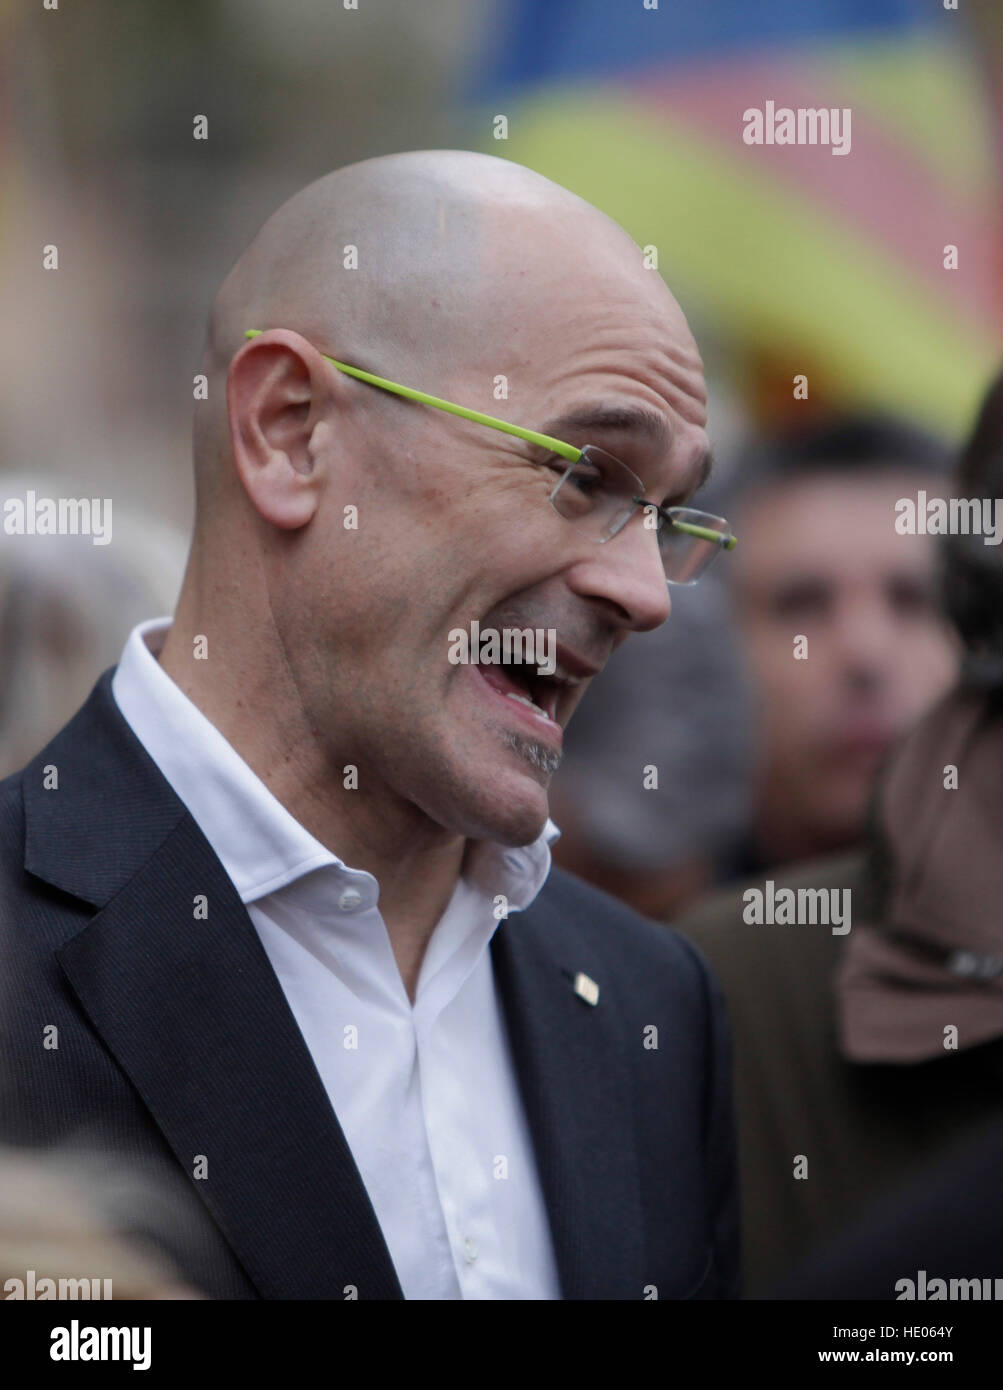 Barcelona, Catalonia, Spain. 16th Dec, 2016.      RaŸl Romeva speaks to press. Catalan Members of Parliament and Mayors from the cities and towns of Catalonia demonstrate their support to the Parliament President, Carme Forcadell, before she goes into Court. Forcadell has been accused from Spanish Government to commit anti-constitutional acts, by approving the path to get the Referendum for Catalonia Independence.    © rich bowen/Alamy Live News Stock Photo